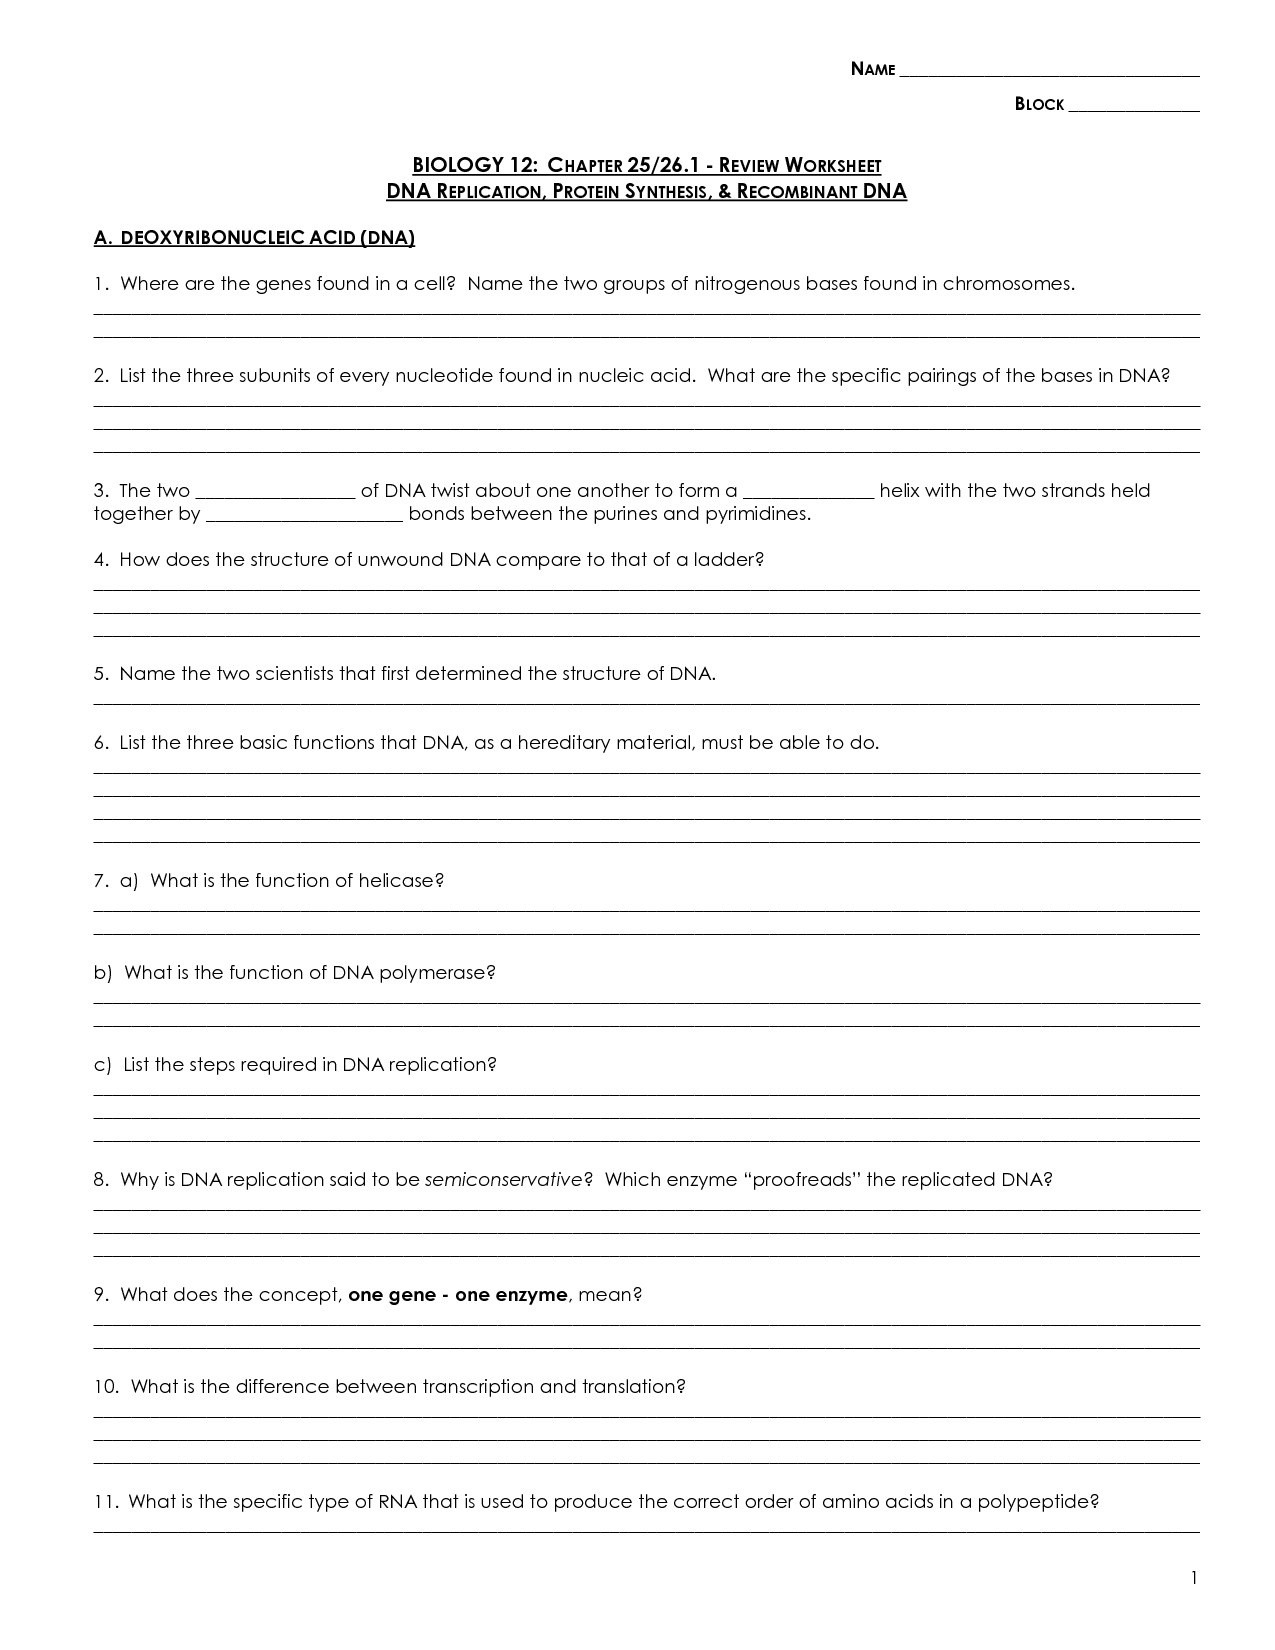 DNA and Replication Worksheet Answers